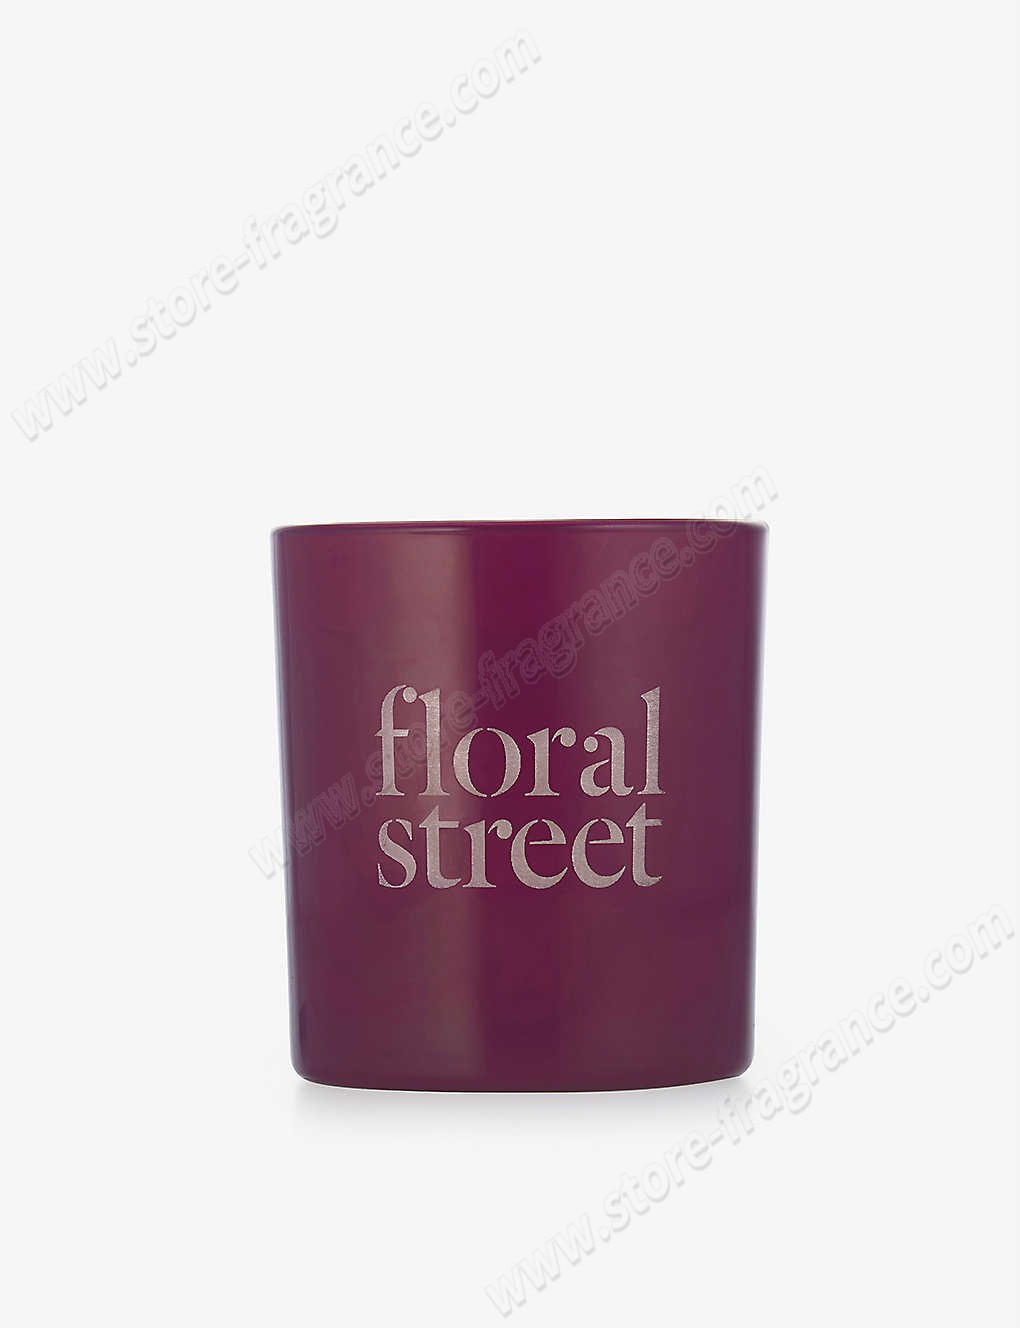 FLORAL STREET/Santal candle 200g ✿ Discount Store - -0